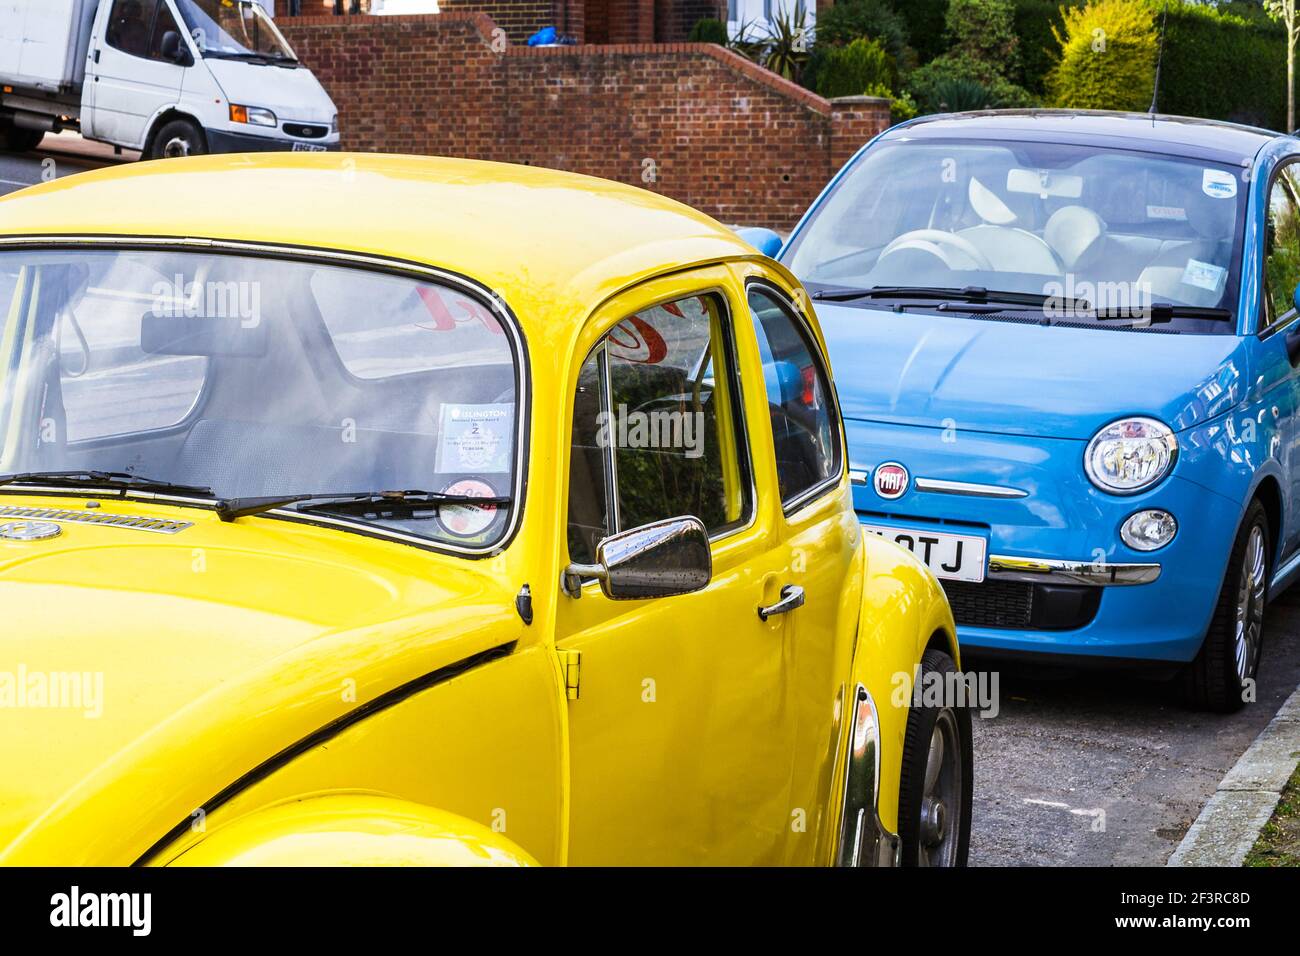 Bright yellow and blue cars parked in a residential area of North London, UK Stock Photo